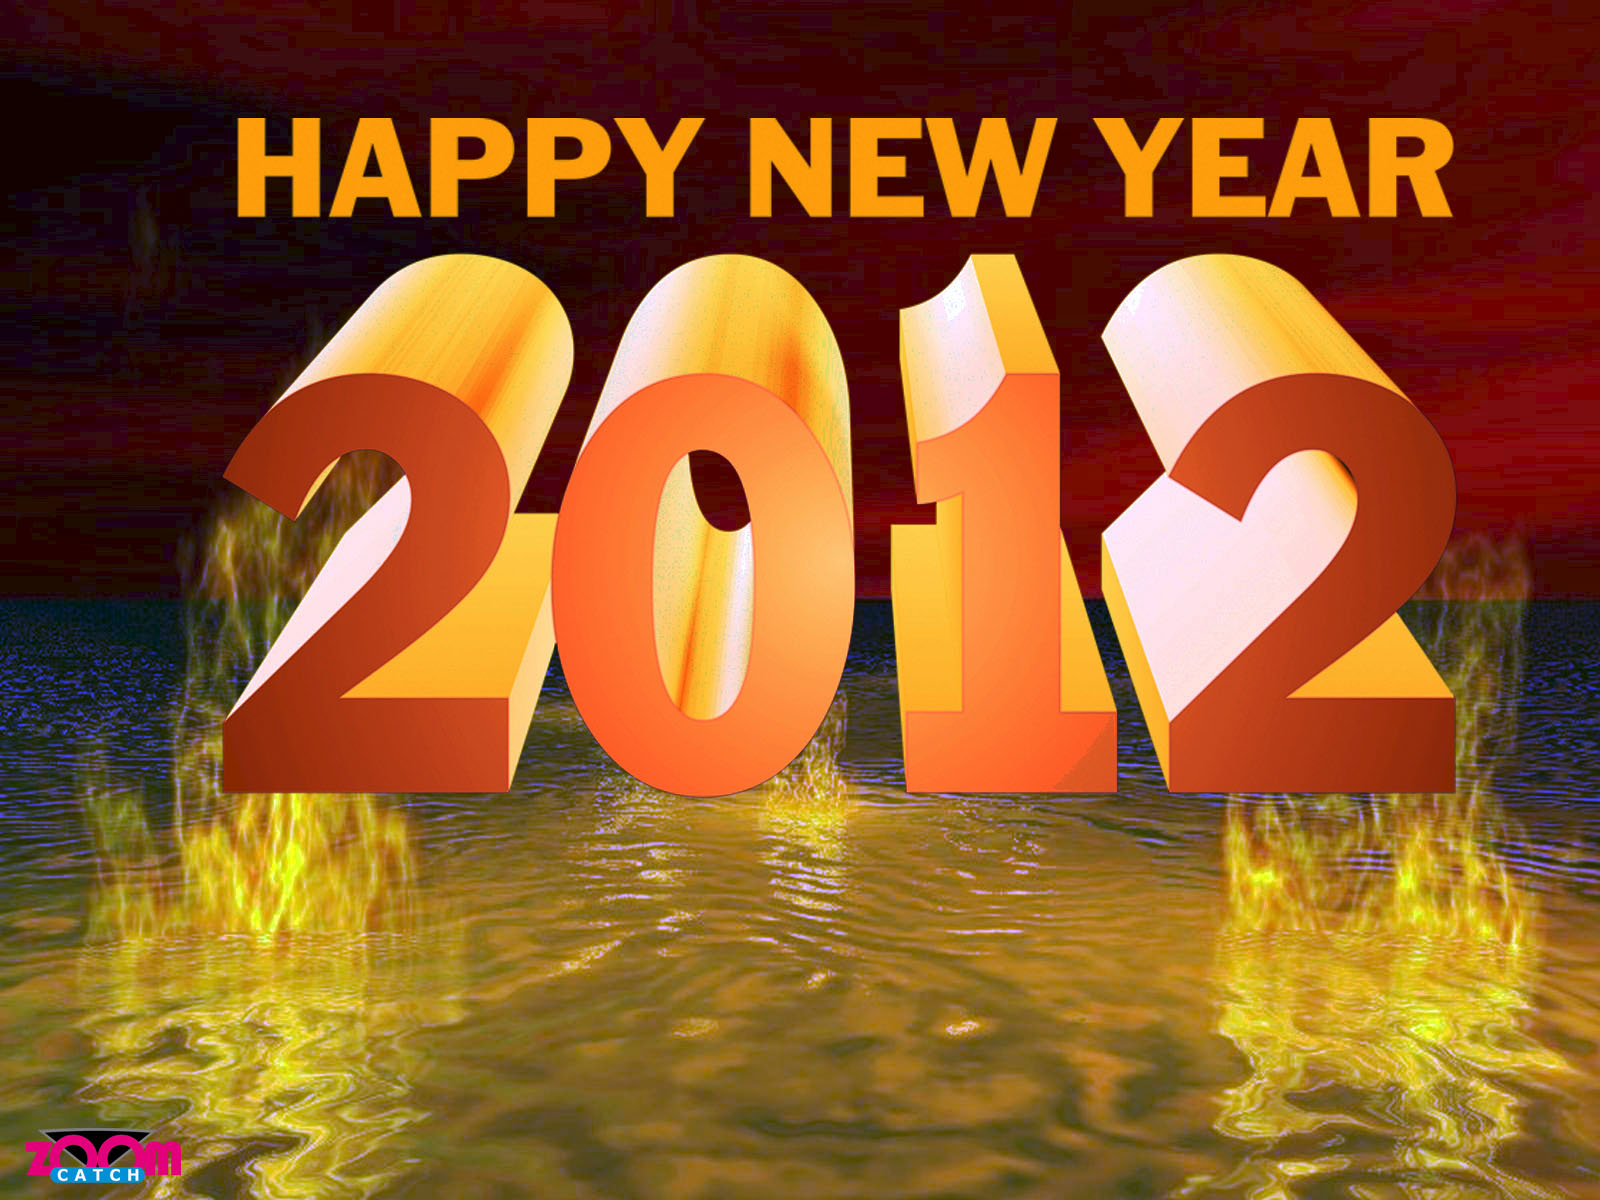 Nice wallpapers New Year 2012 1600x1200px